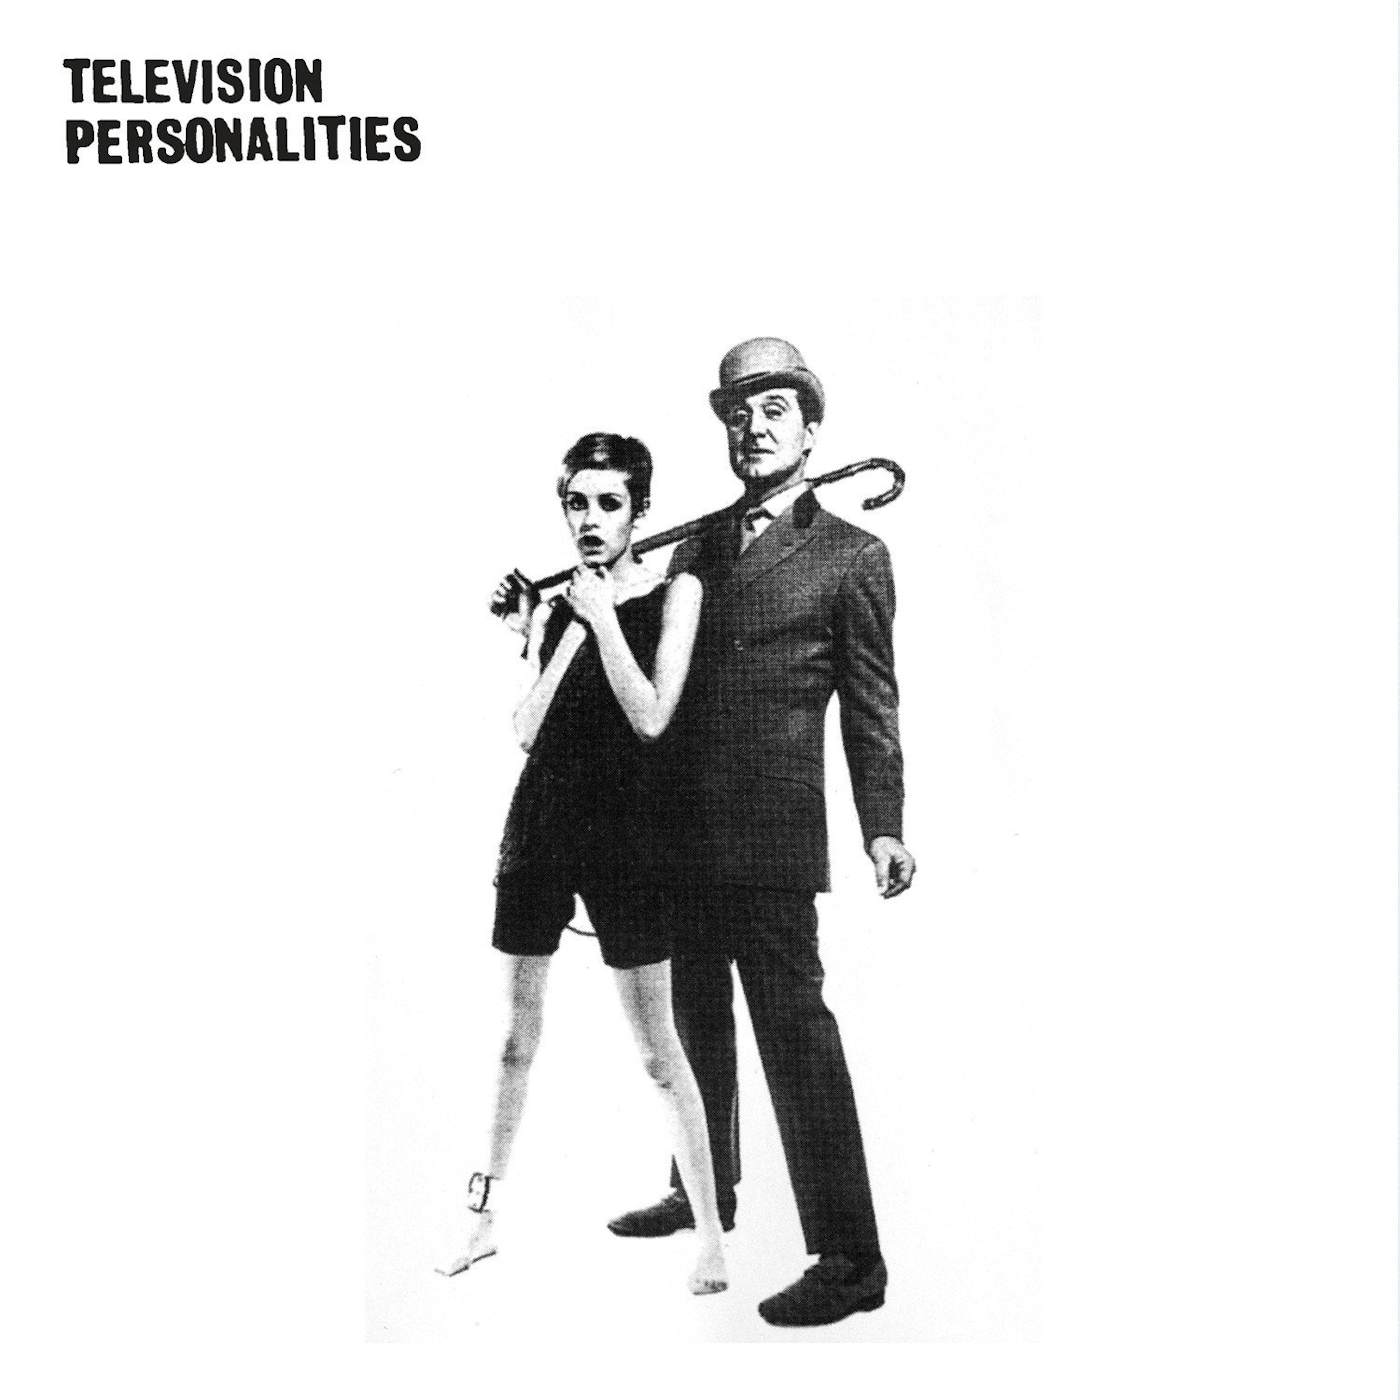 Television Personalities 'And Don't The Kids Just Love It' Vinyl Record